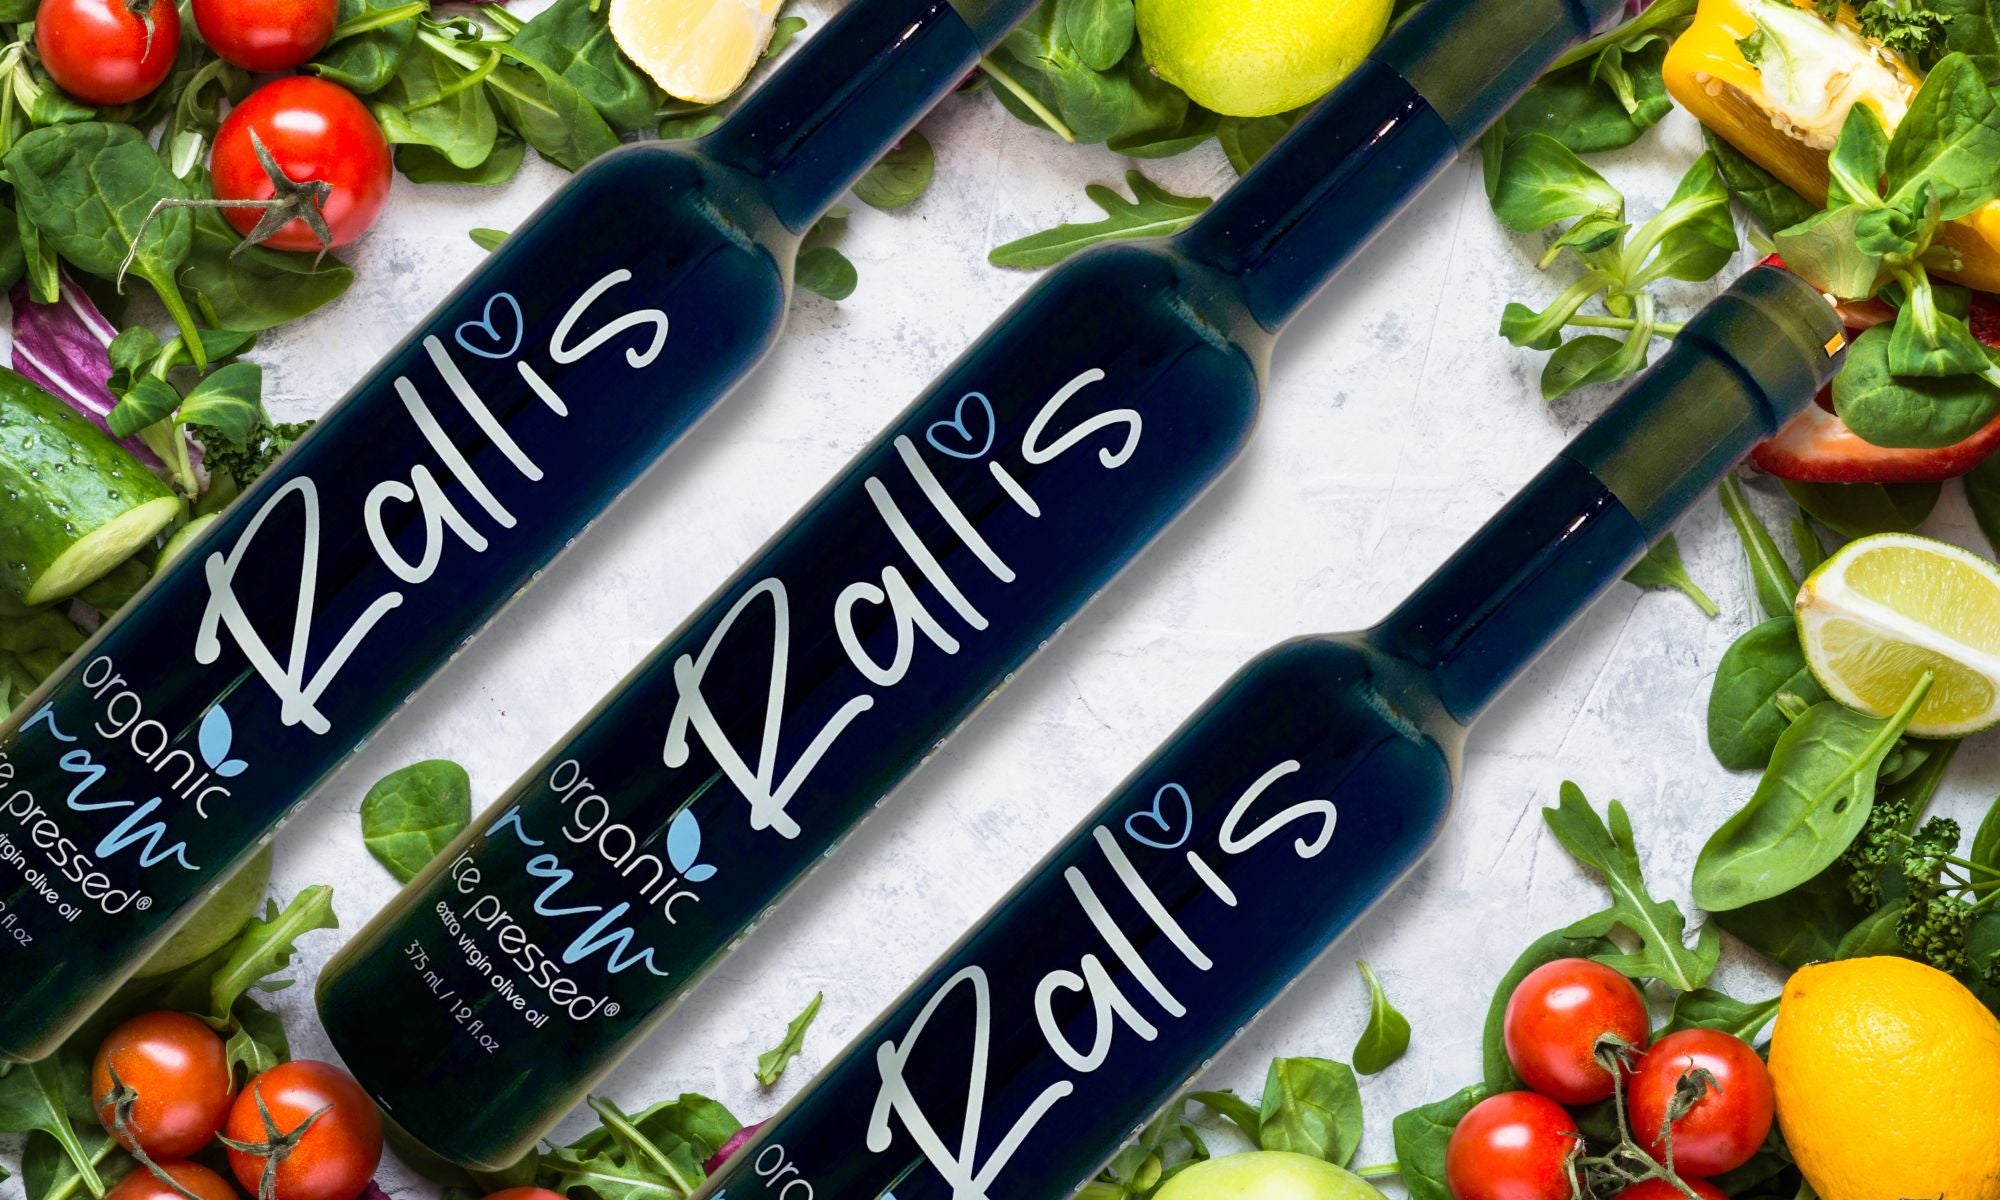 RALLIS OLIVE OIL REVIEW